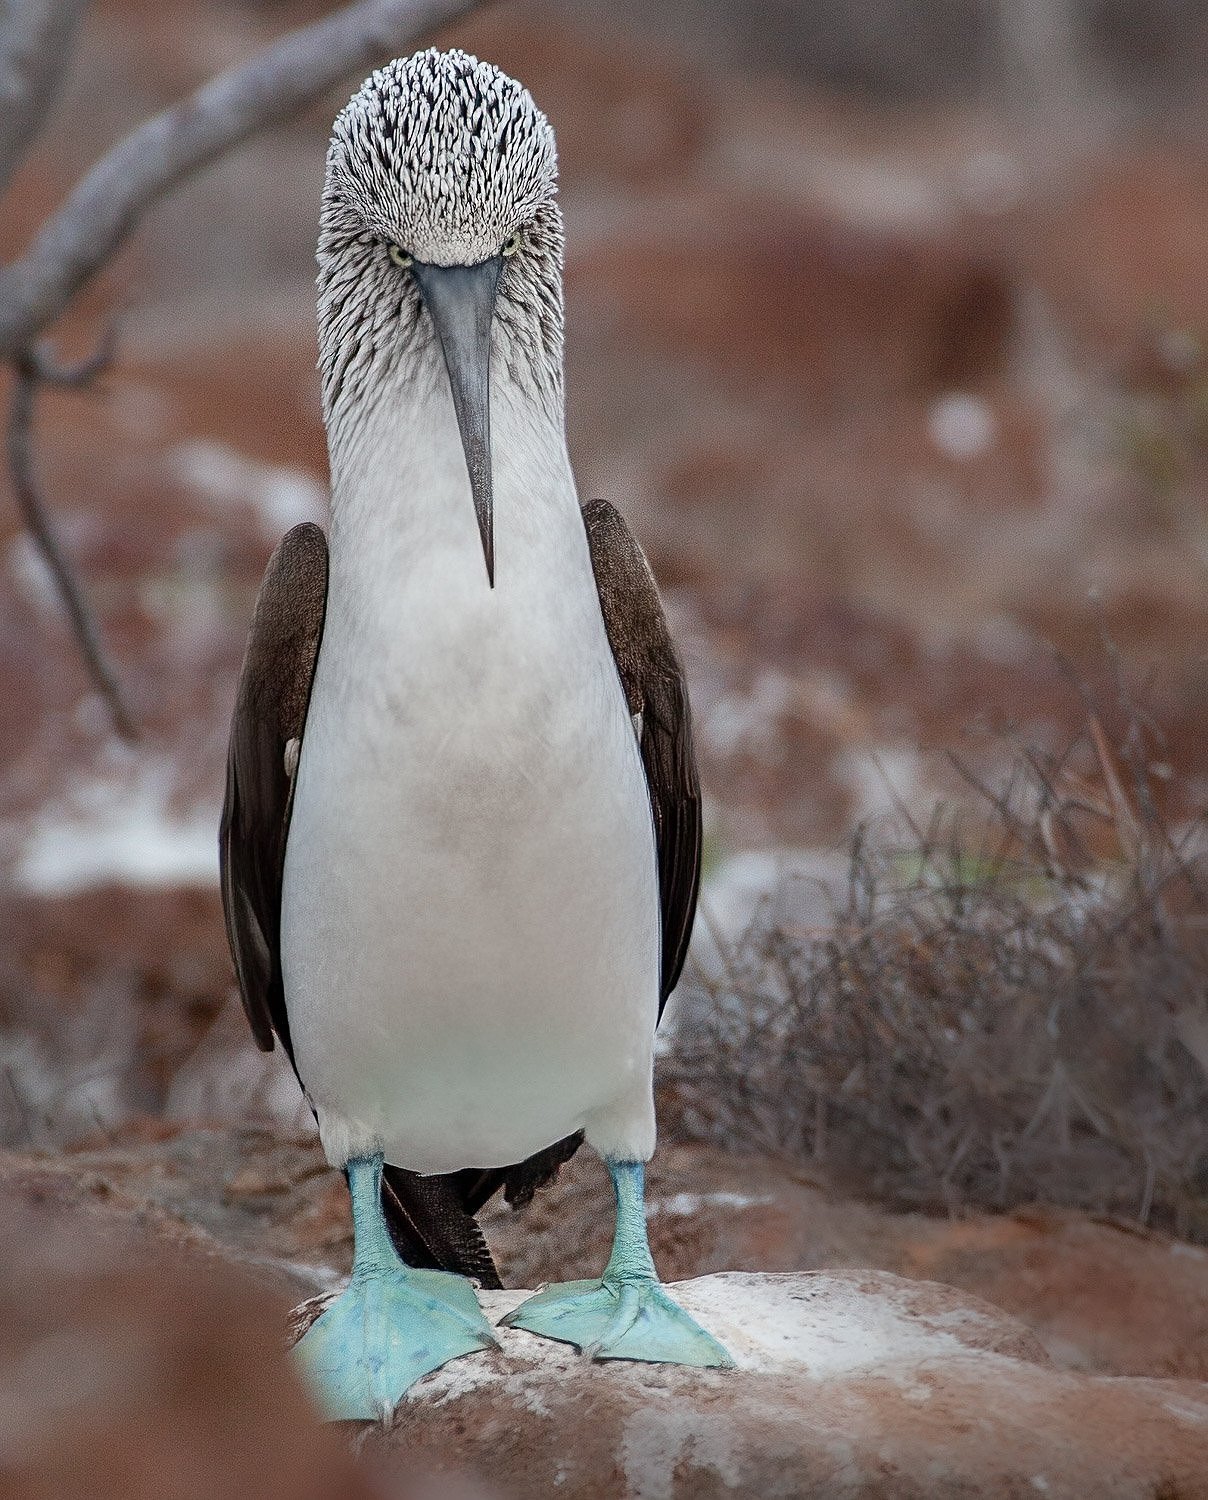 Imperious, Blue Footed Booby